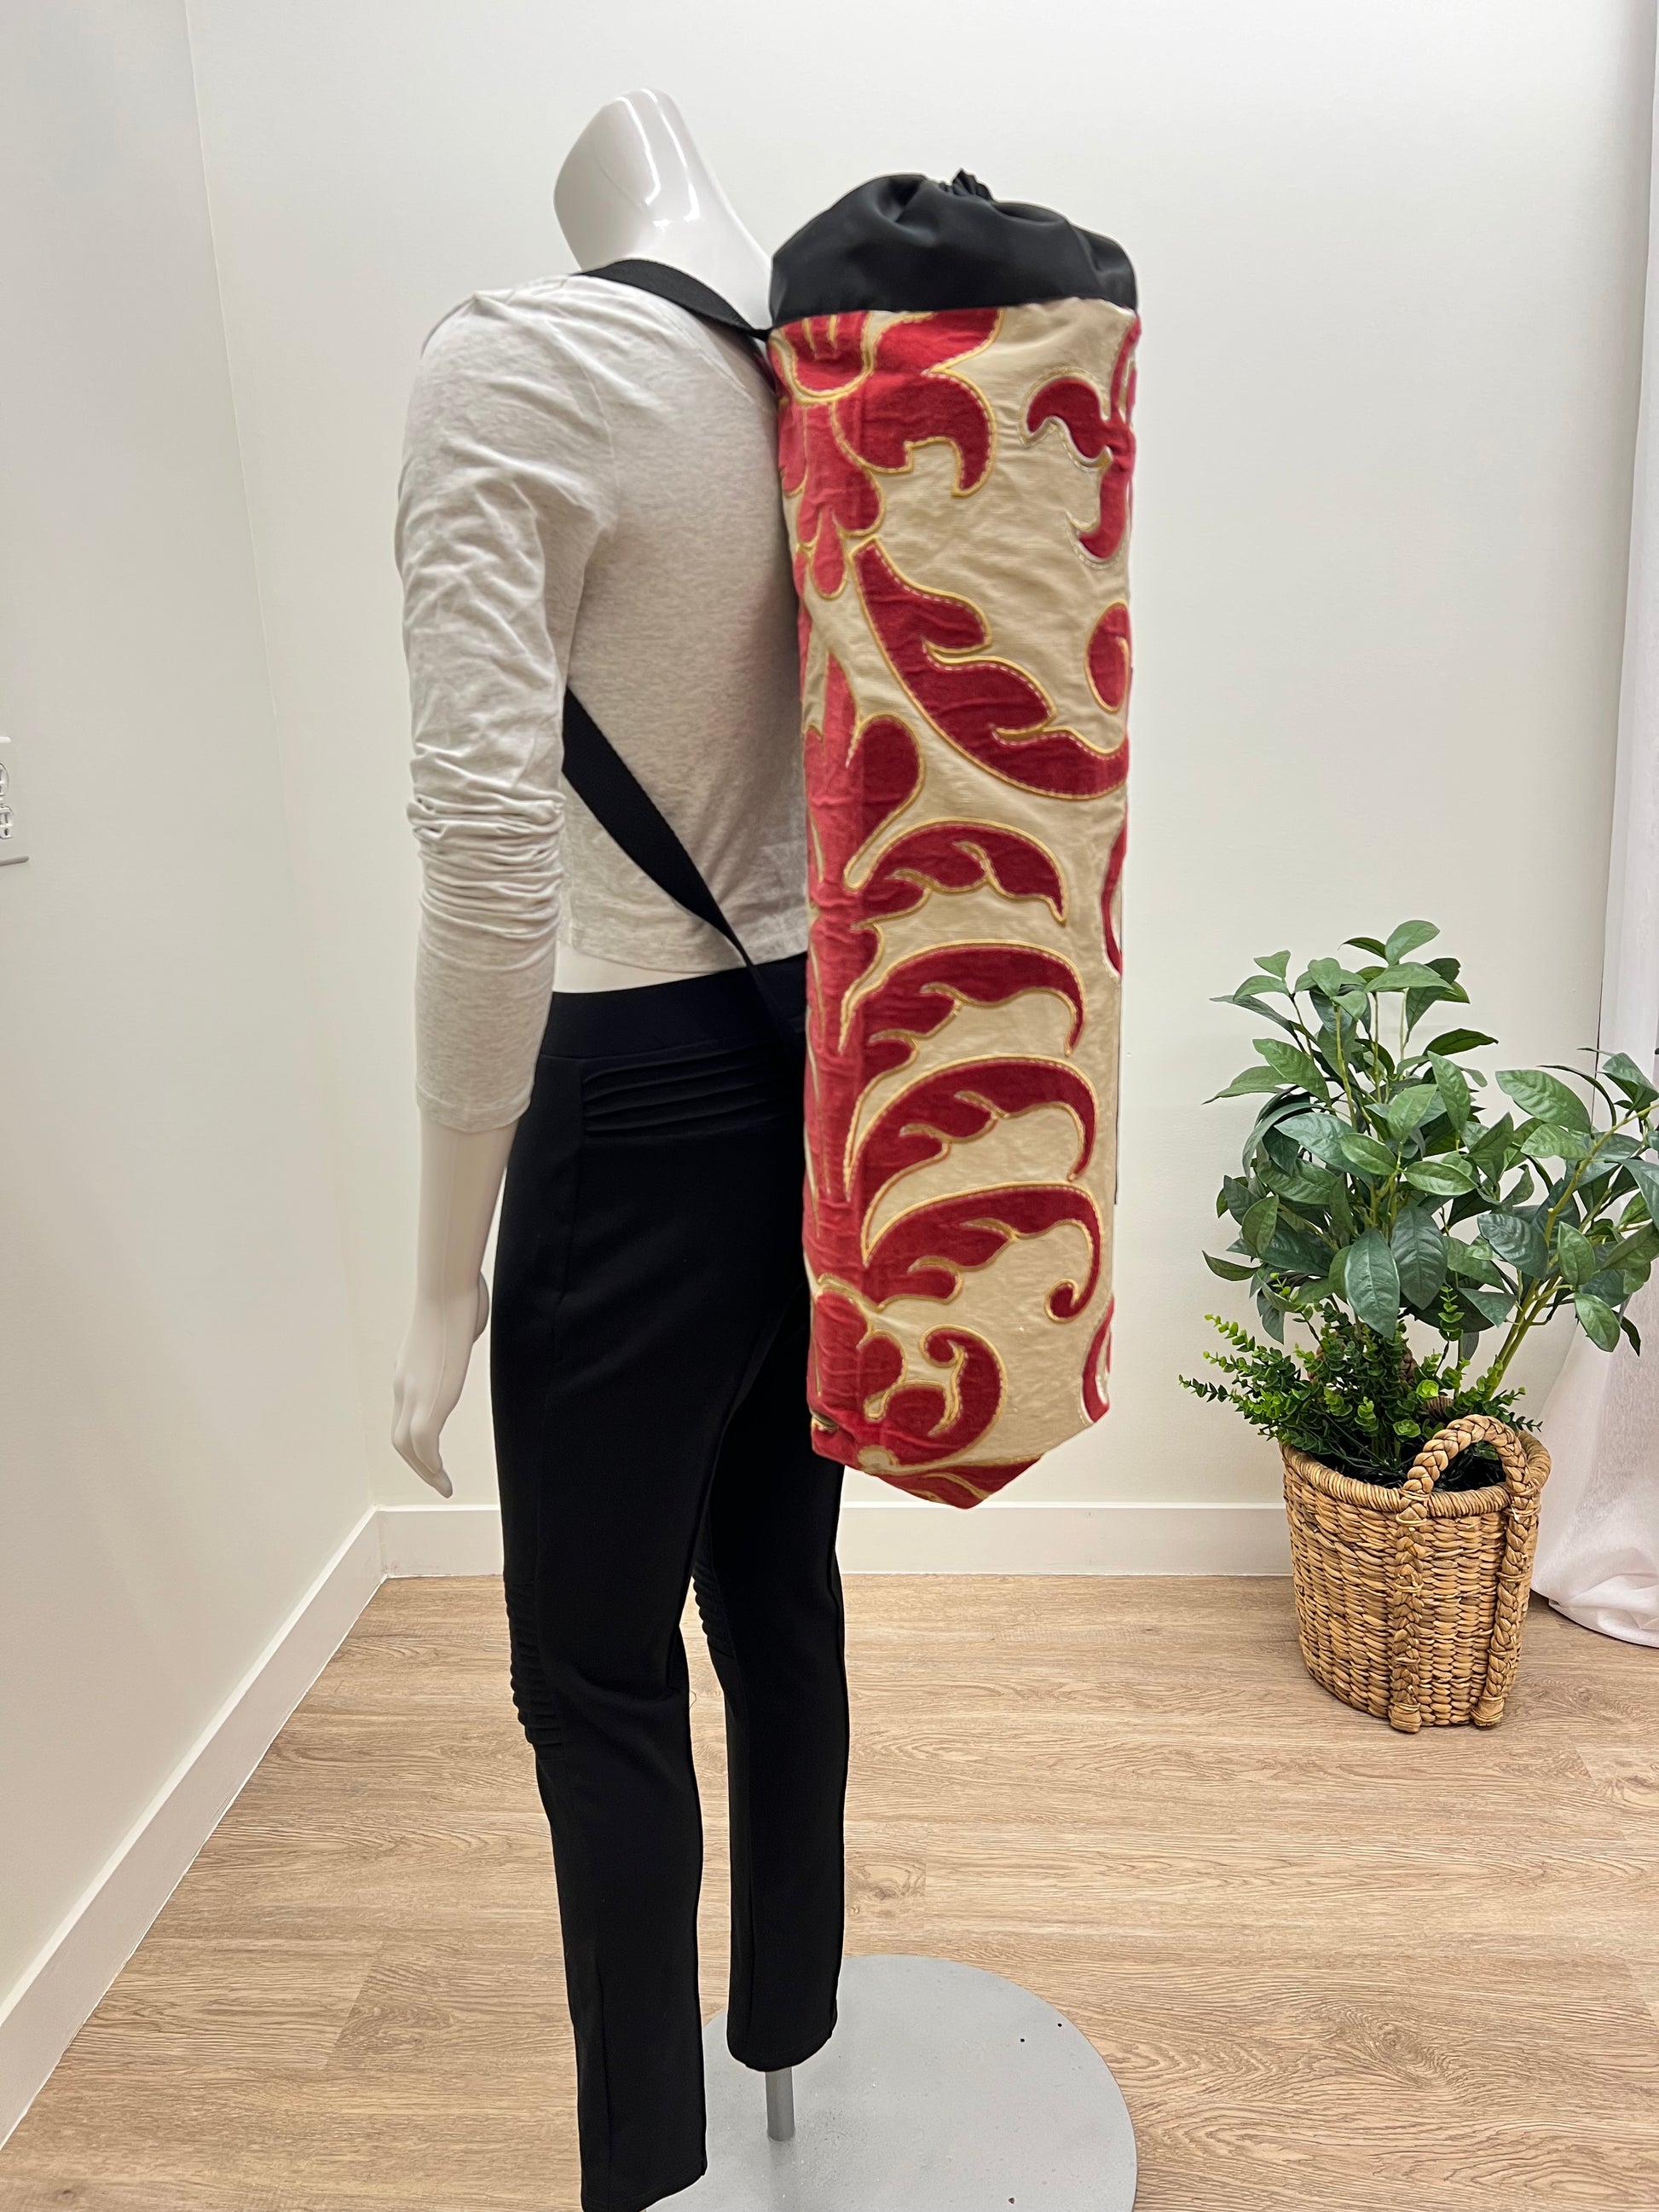 Yoga Mat Bag, Backpack Option in Red and Gold Scroll embroidery print handcrafted by My Yoga Room Elements in their Canadian Studio